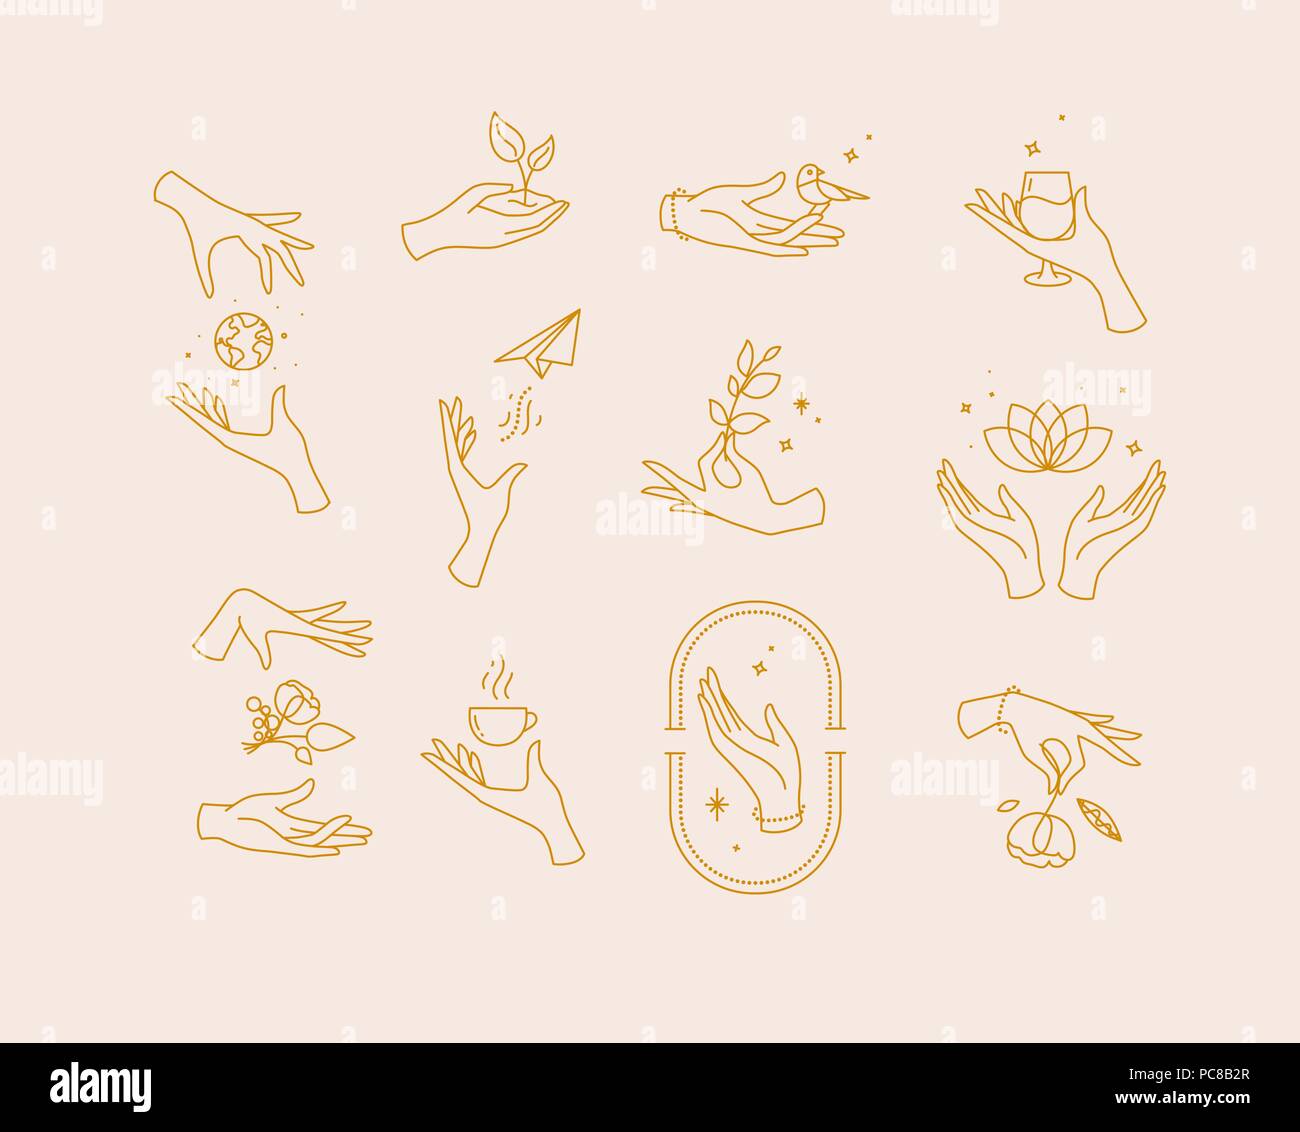 Hand symbols silhouettes drawing in flat style with brown lines on ...